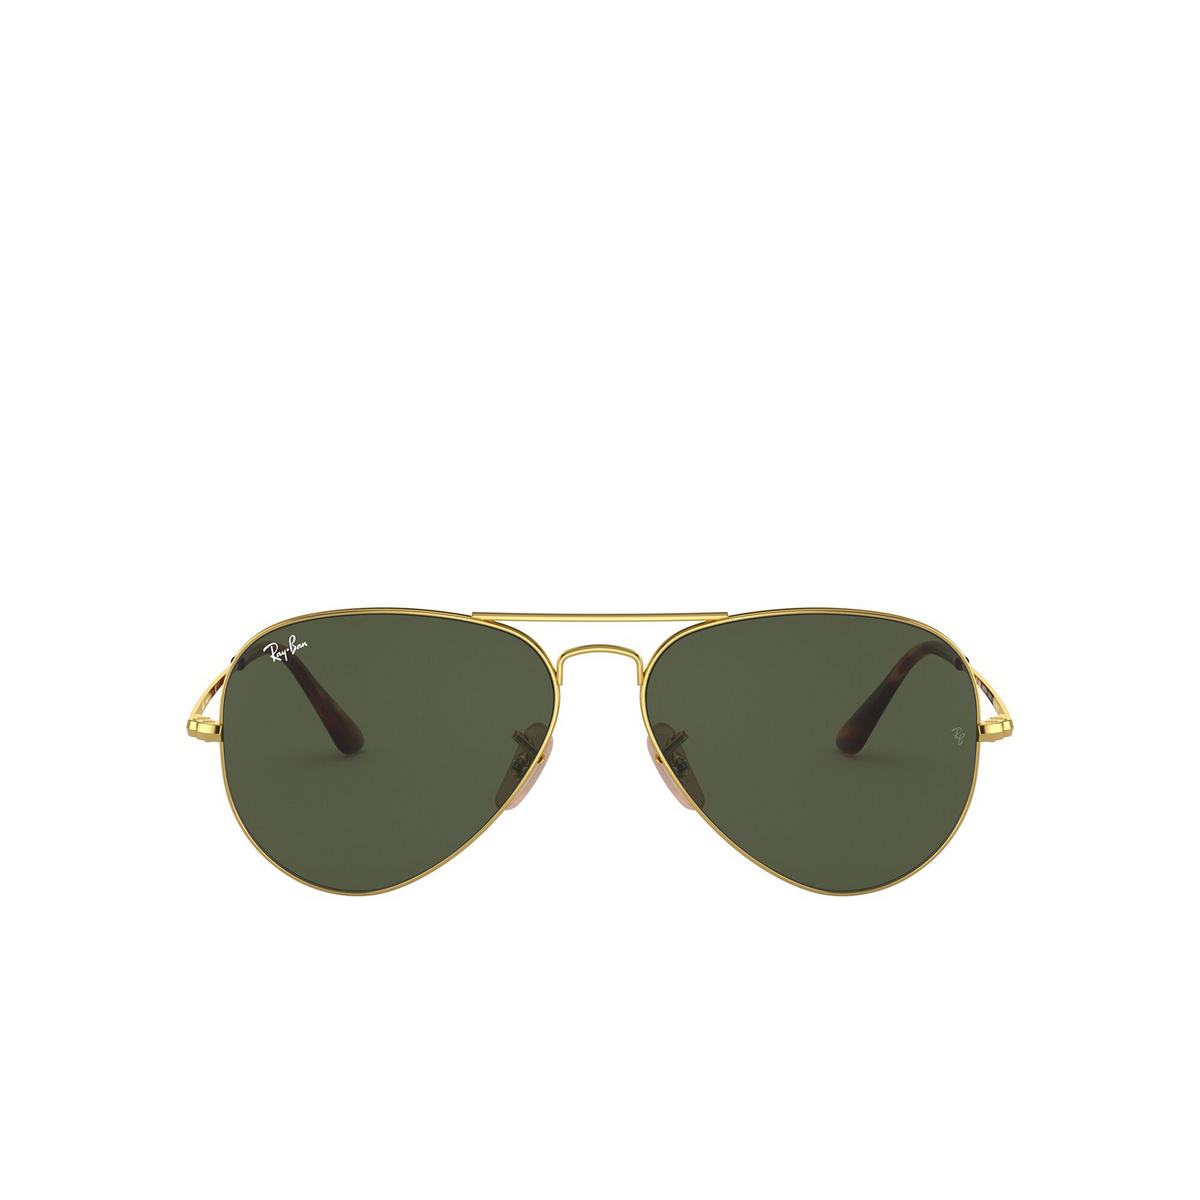 Ray-Ban AVIATOR METAL II Sunglasses 914731 Gold - front view